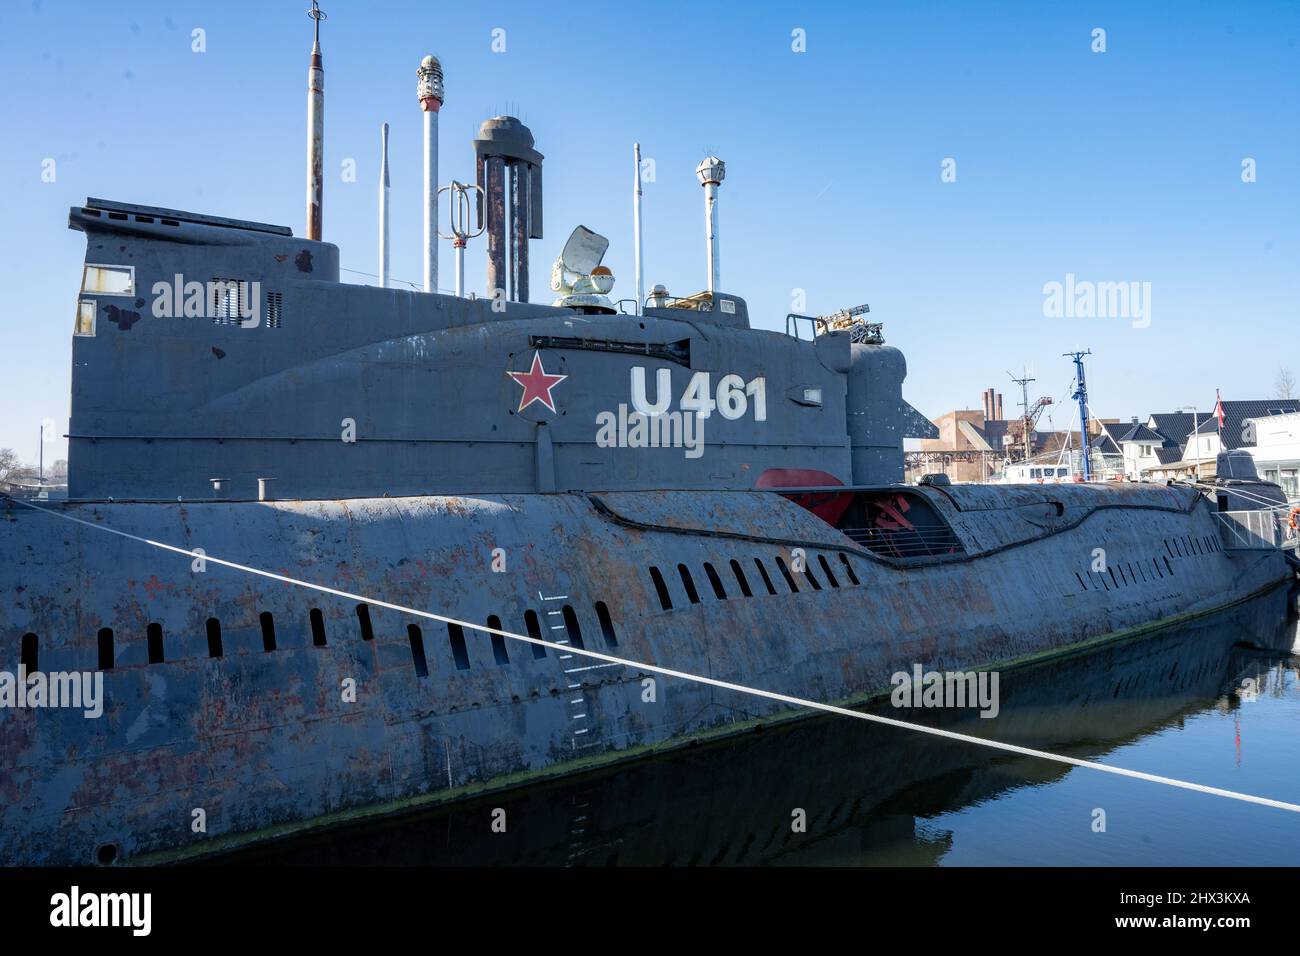 09 March 2022, Mecklenburg-Western Pomerania, Peenemünde: The decommissioned Russian submarine U 461 of the Juliett class lies in the harbor of Peenemünde. The 87-meter-long diesel-electric-powered missile submarine was formerly armed with four cruise missiles and torpedoes. The boat was put into service in 1965 and can be seen today as a museum submarine. Photo: Stefan Sauer/dpa Stock Photo